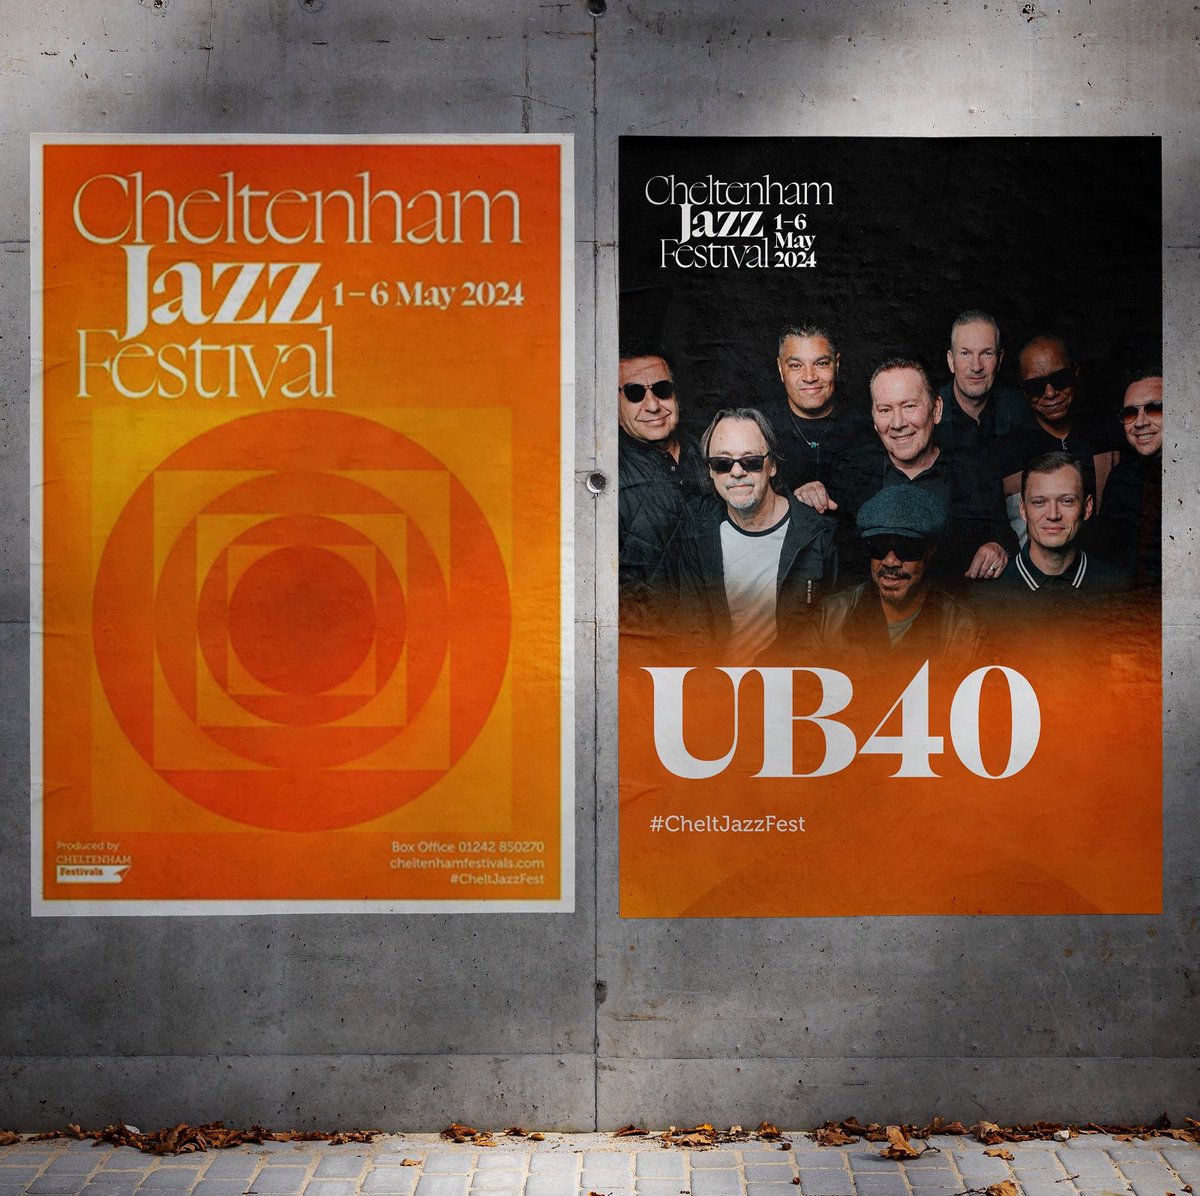 We’re playing at the @cheltfestivals #JazzFest2024 today - looking forward to seeing you all there. Post your gig pictures and don't forget to tag us @UB40OFFICIAL #UB40- we'll retweet or like our favourites! Big Love UB40 #UB45 #45anniversary #cheltenhamjazzfestival #reggae